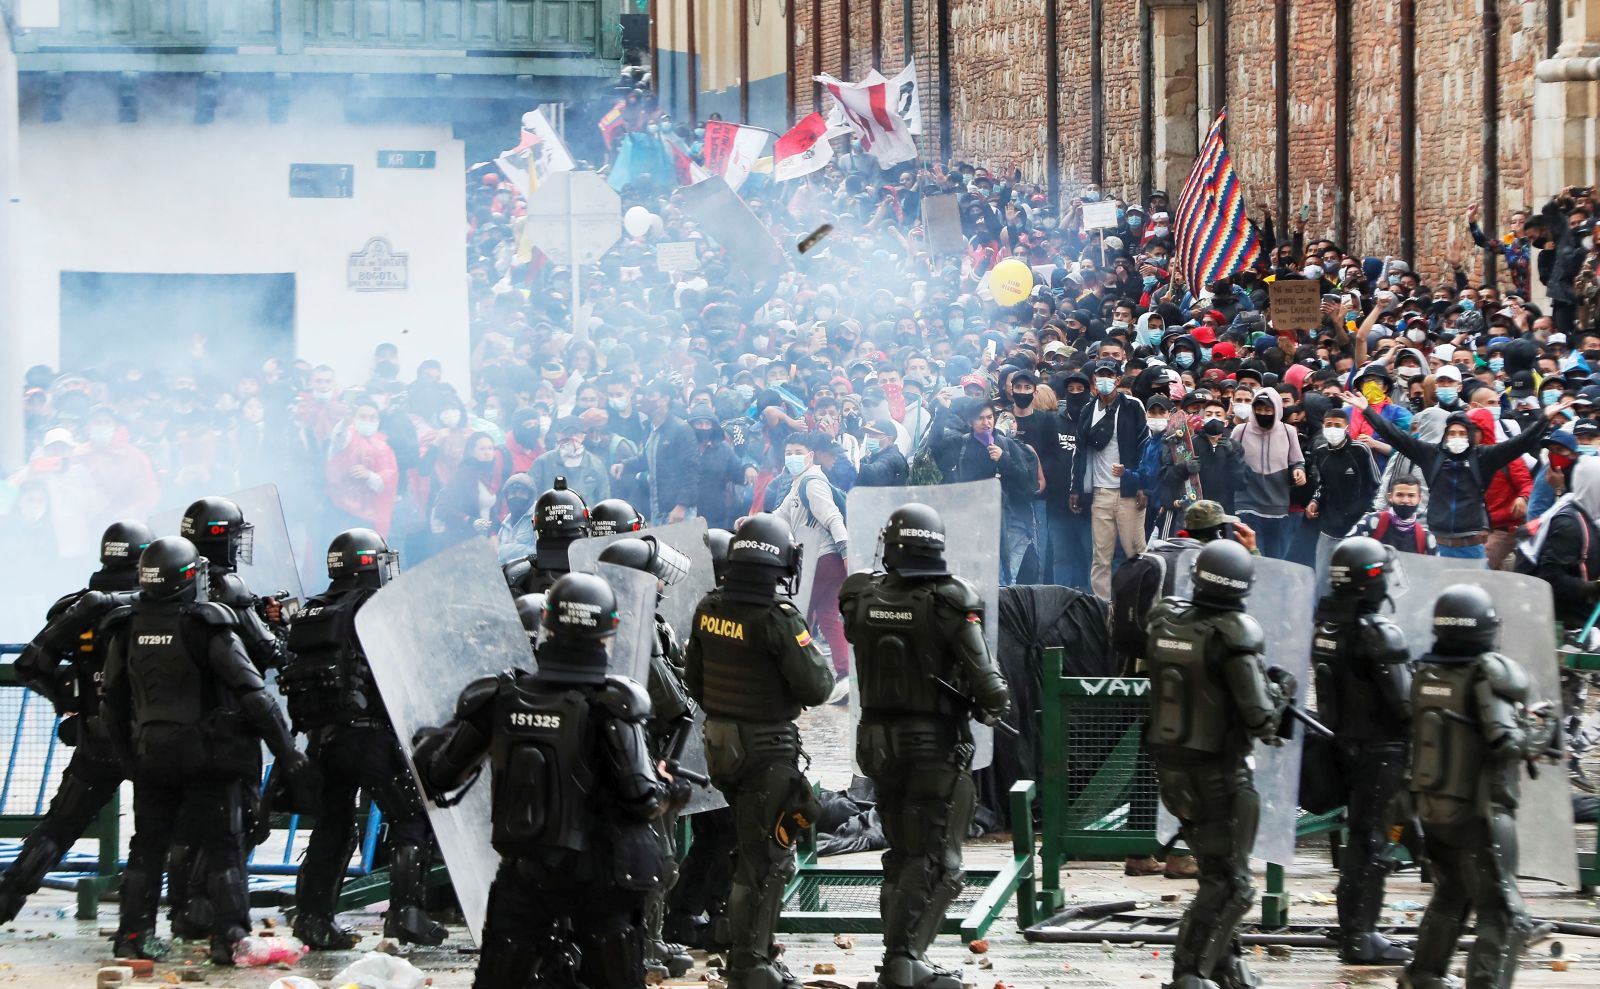 epa09166006 Protesters clash with Colombian Police during a protest in the Plaza de Bolivar in Bogota, Colombia 28 April 2021. Unions and social organizations took to the streets of Bogota and other cities in Colombia to express their rejection of the tax reform bill presented to Congress by the Government, which increases the tax burden mainly on the middle class.  EPA/Carlos Ortega